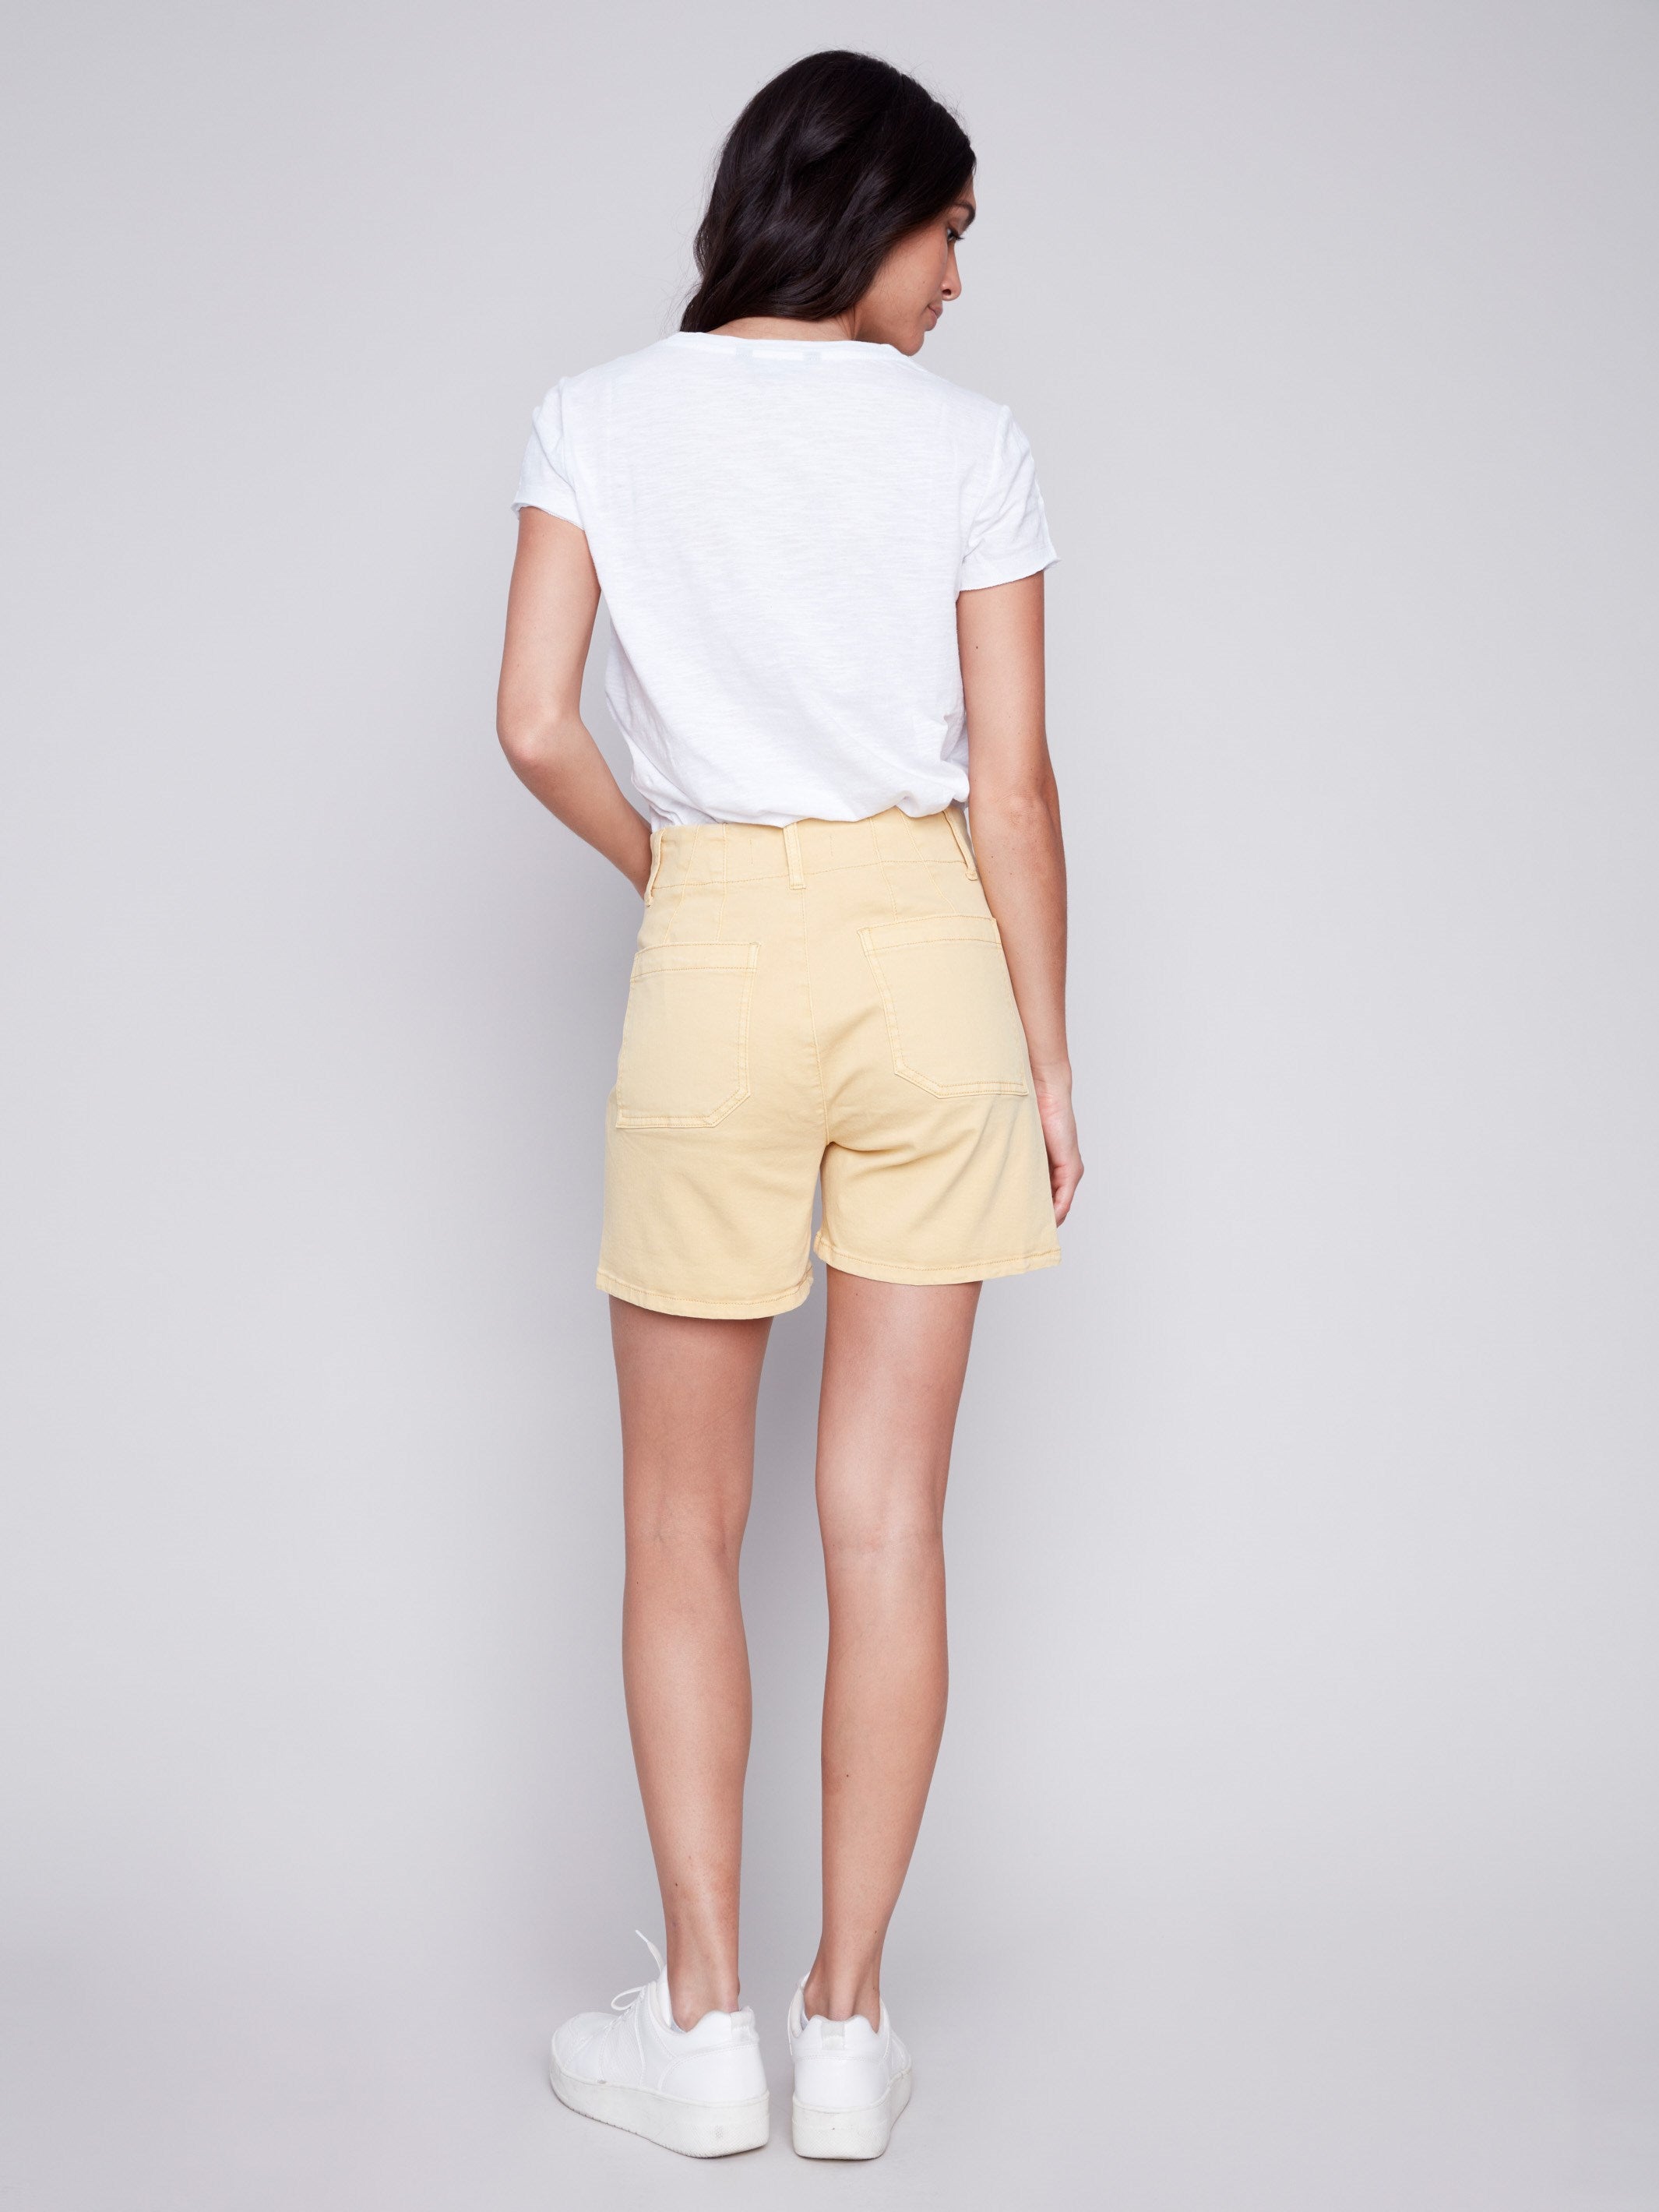 Shorts with Patch Pockets - Lemon - Charlie B Collection Canada - Image 2